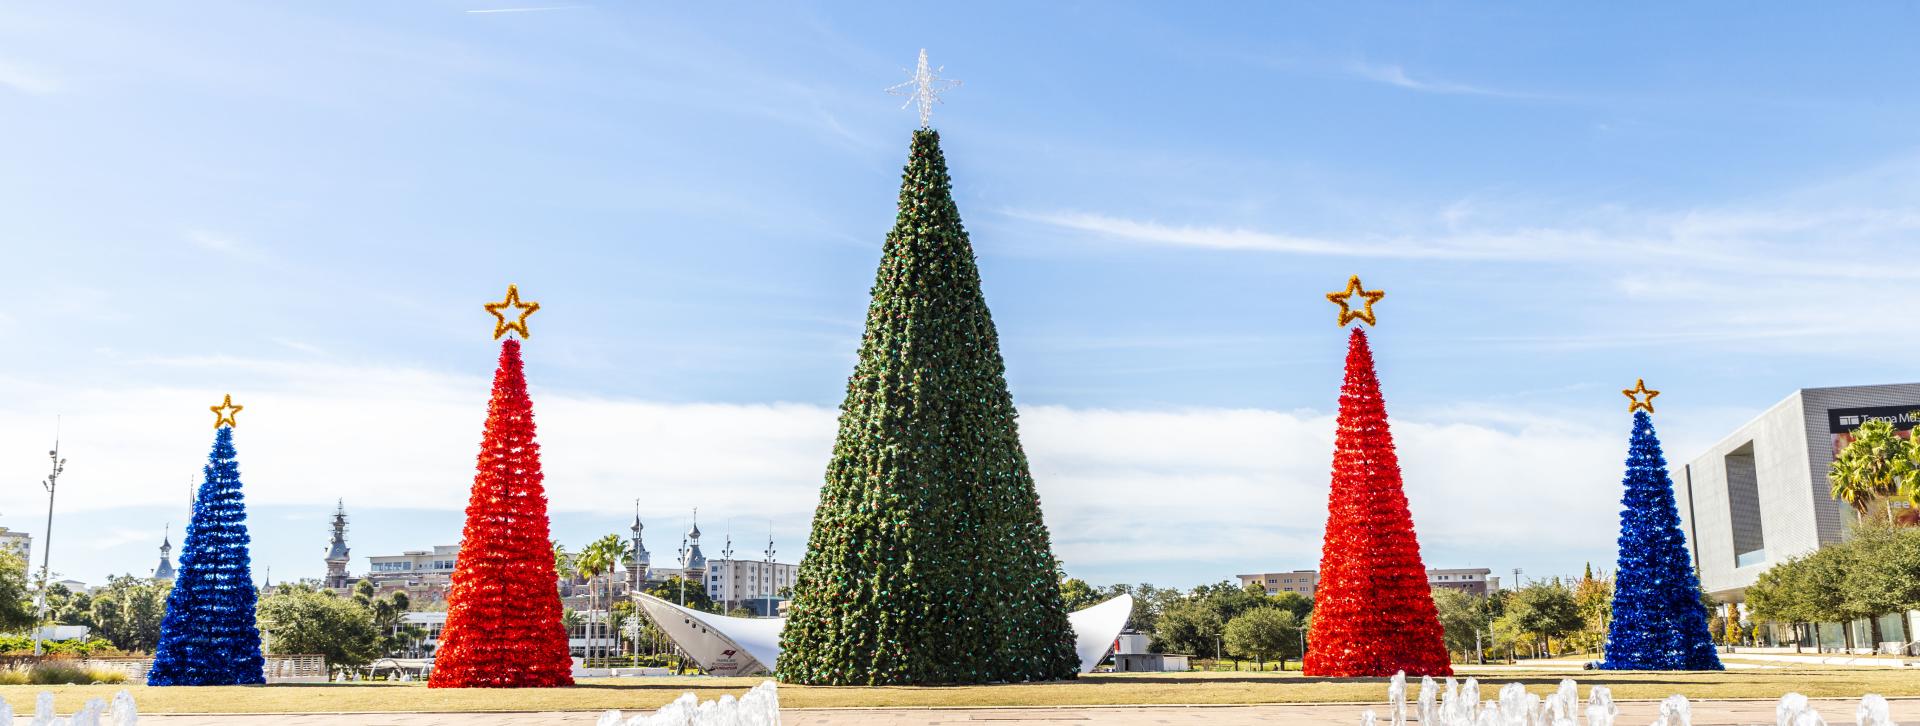 Holiday Season Events in Tampa Bay